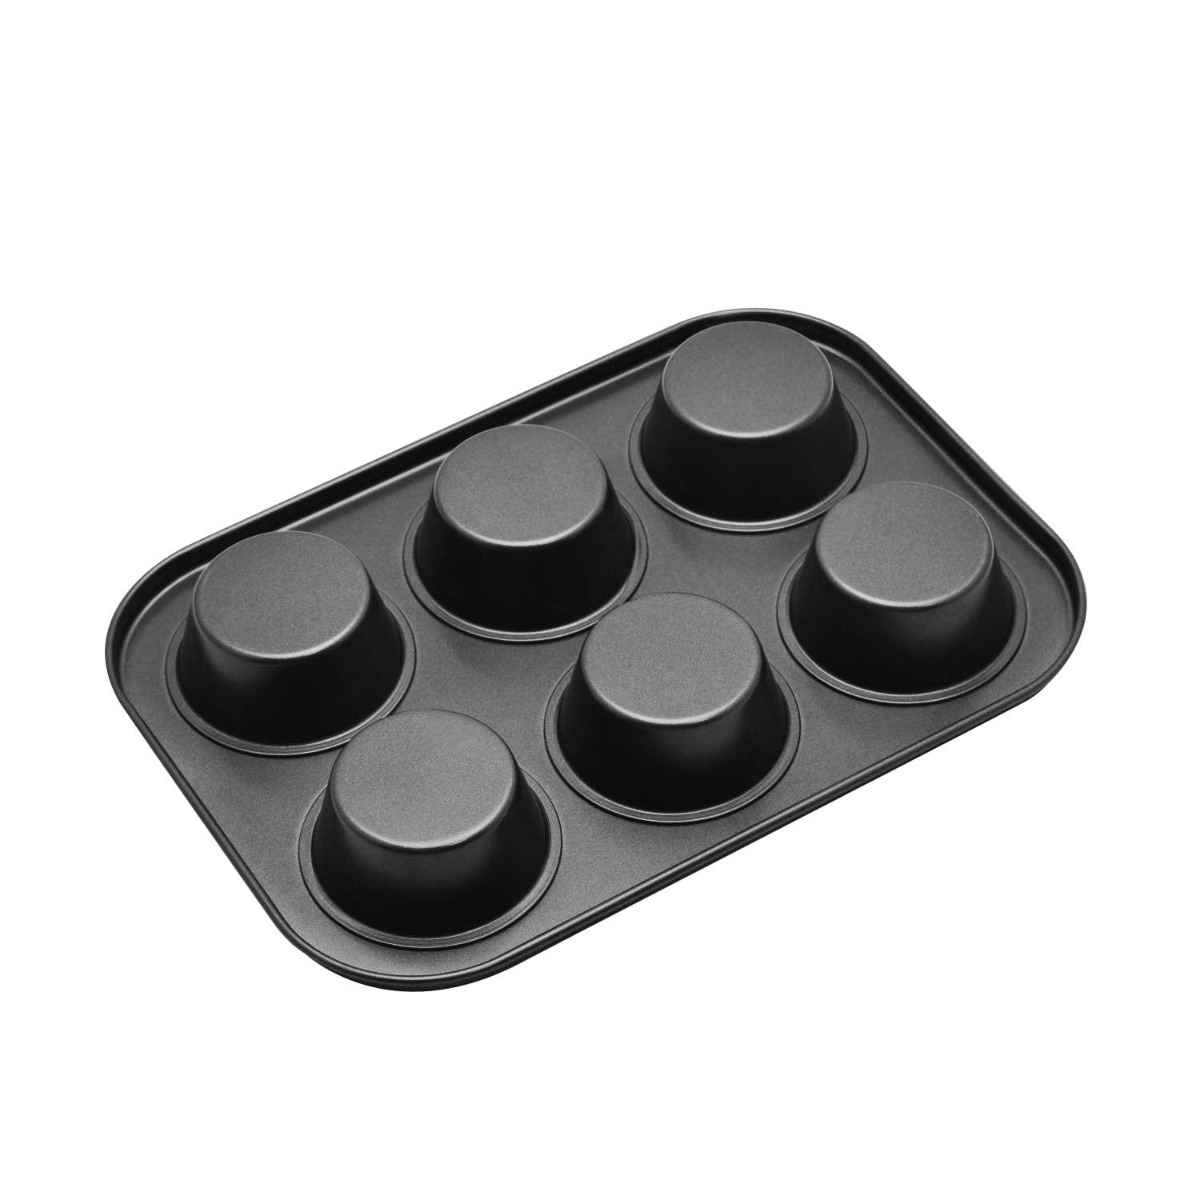 Rk N/S Muffin Tray